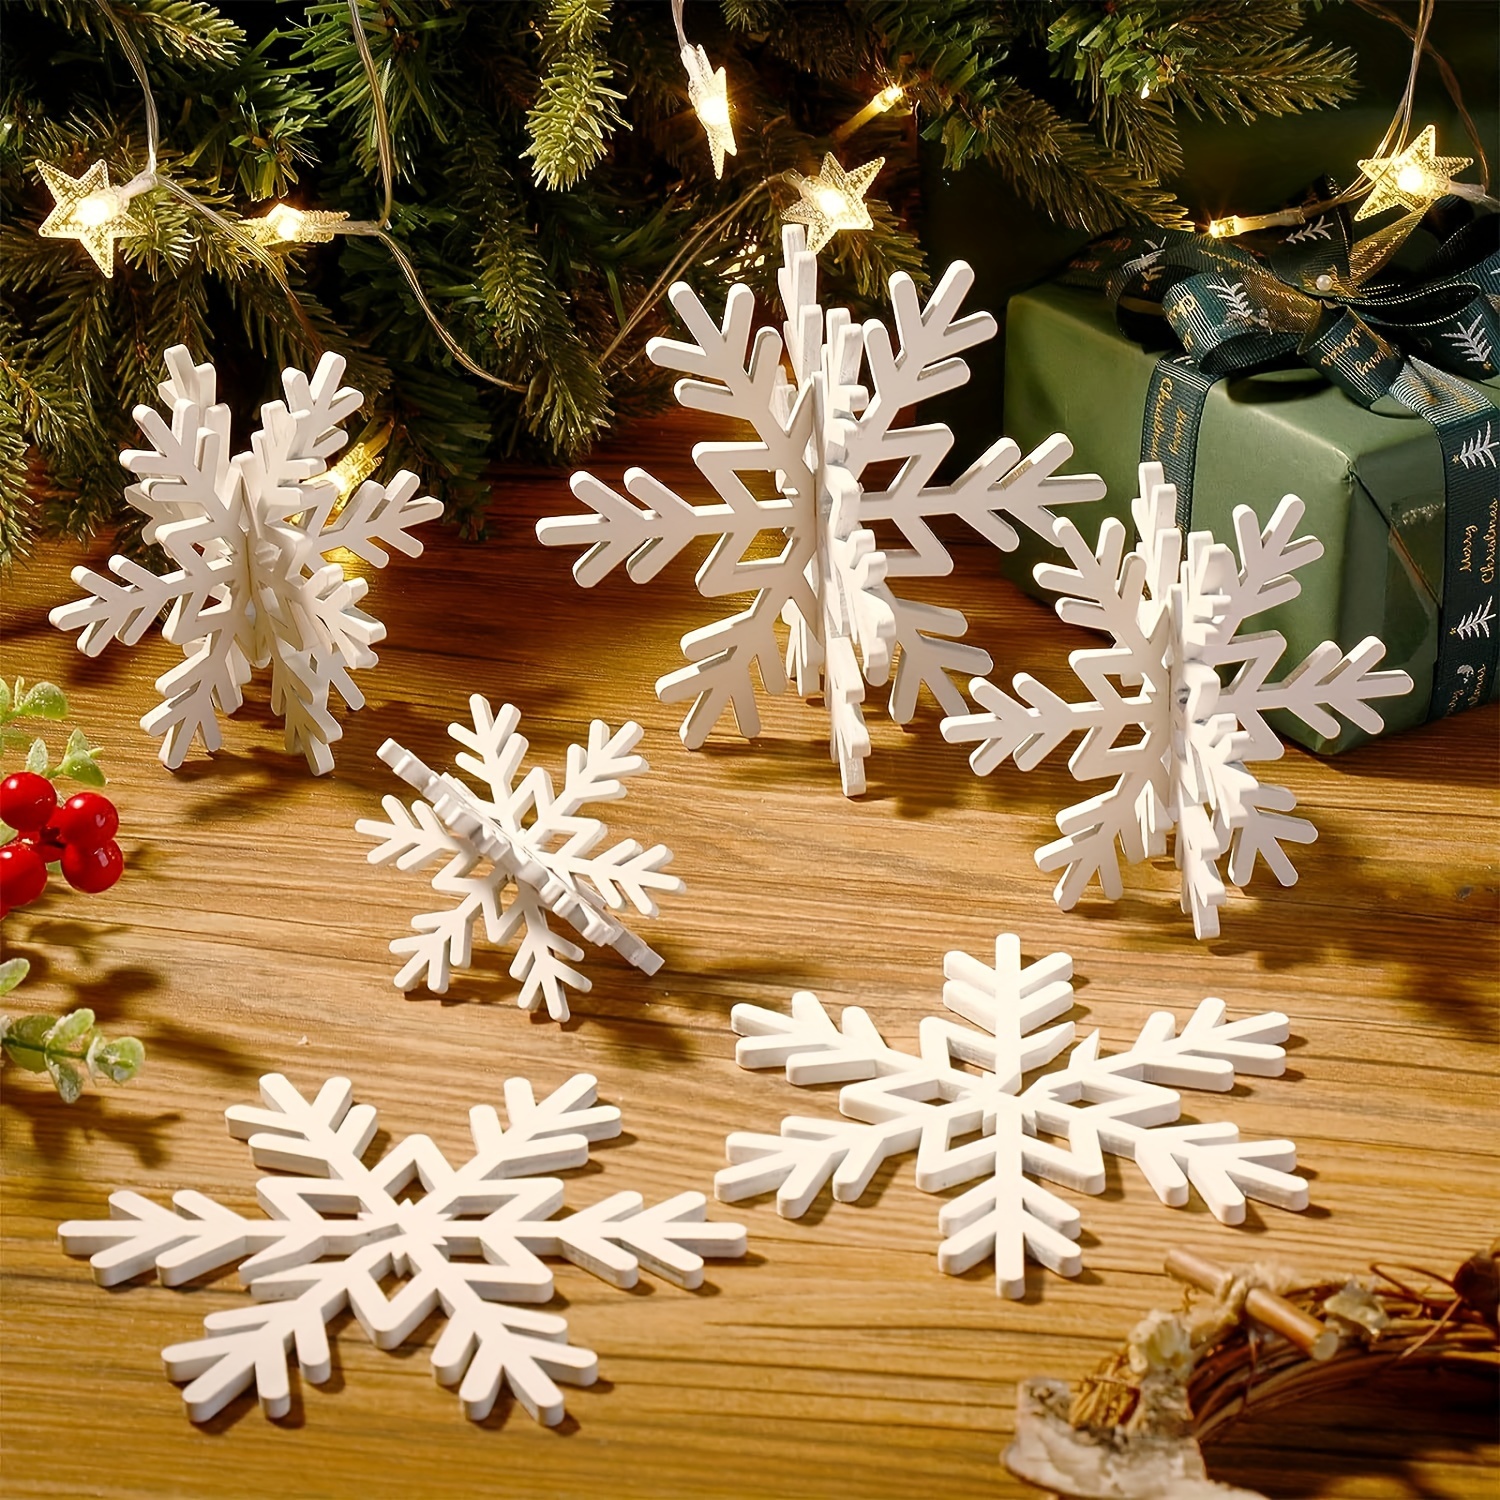 Blulu 3 Piece Winter Snowflake Decorations White Standing Wooden Snowflakes  Christmas Snow Flakes Decorating Tabletop Wooden Snowflakes Decor for Home